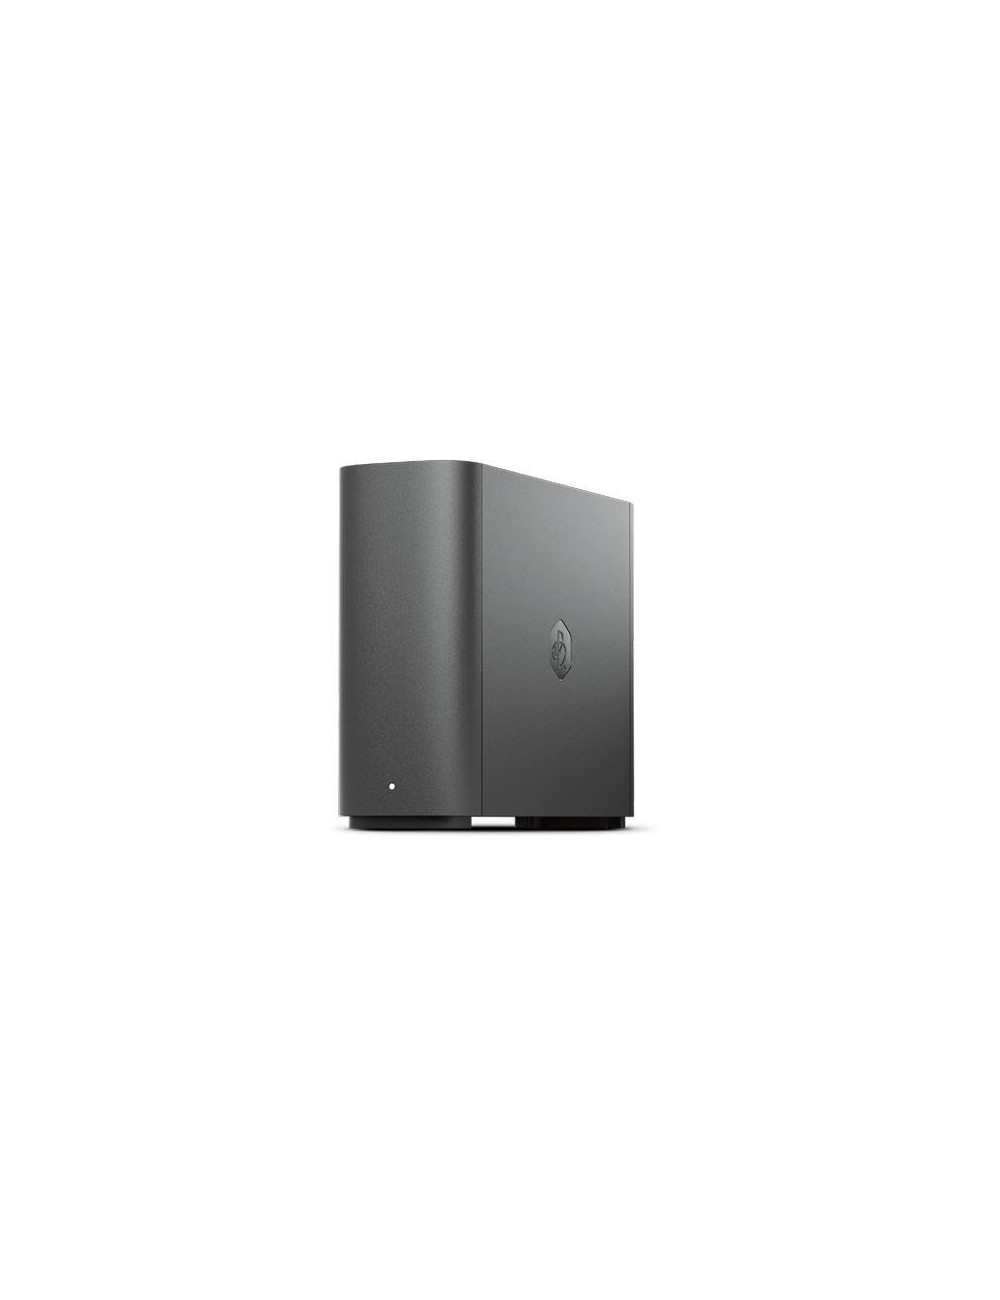 NAS STORAGE COMPACT 1BAY/4TB BST150-4T SYNOLOGY